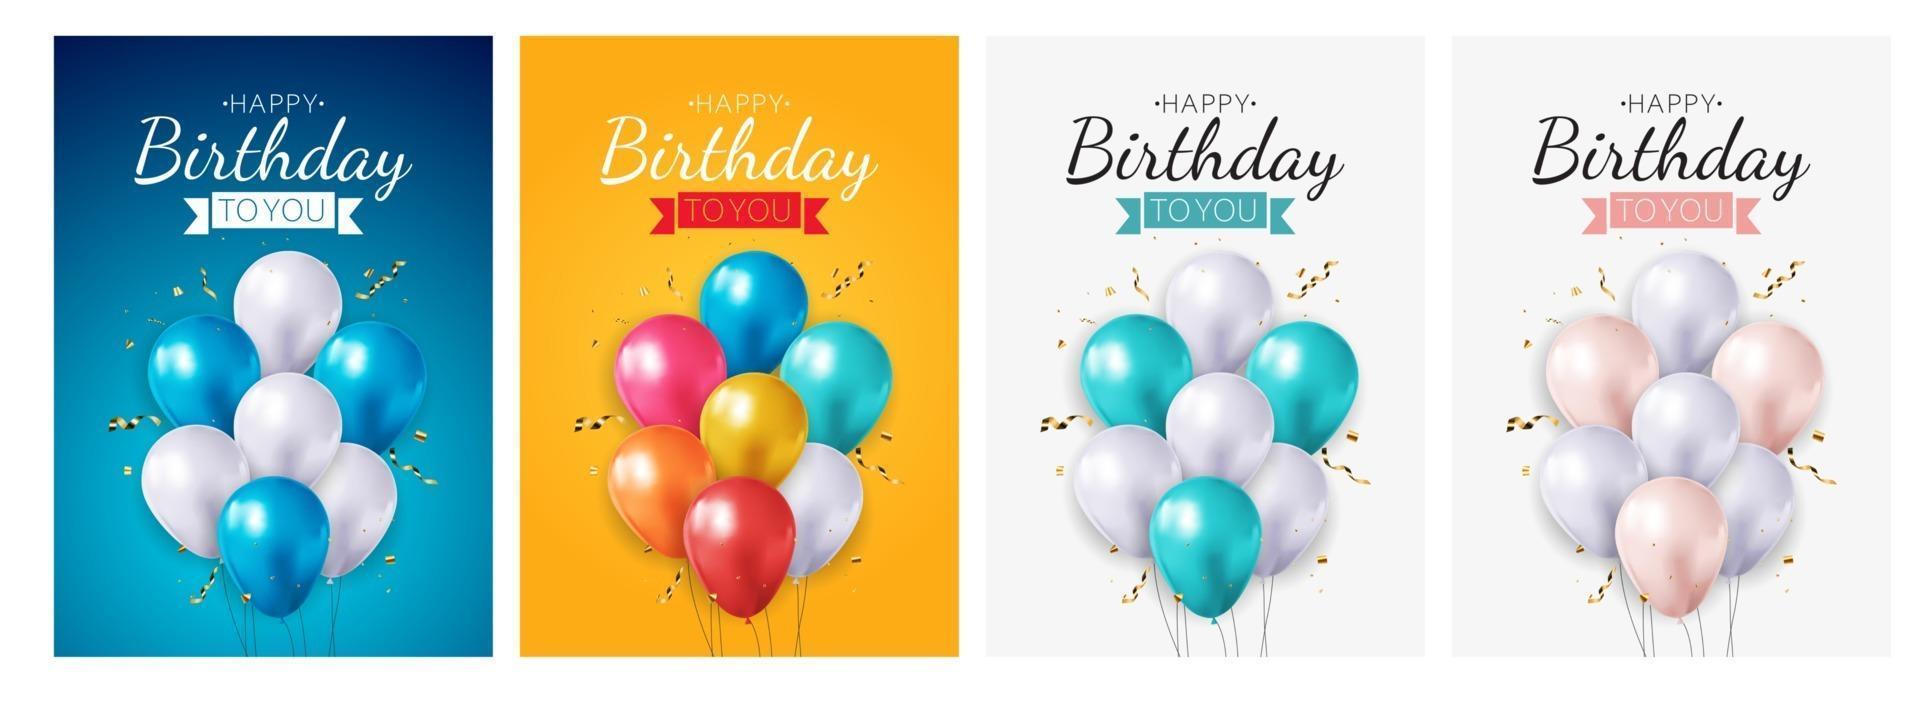 Realistic 3d balloon birthday background for party, holiday, promotion card, poster collection set vector